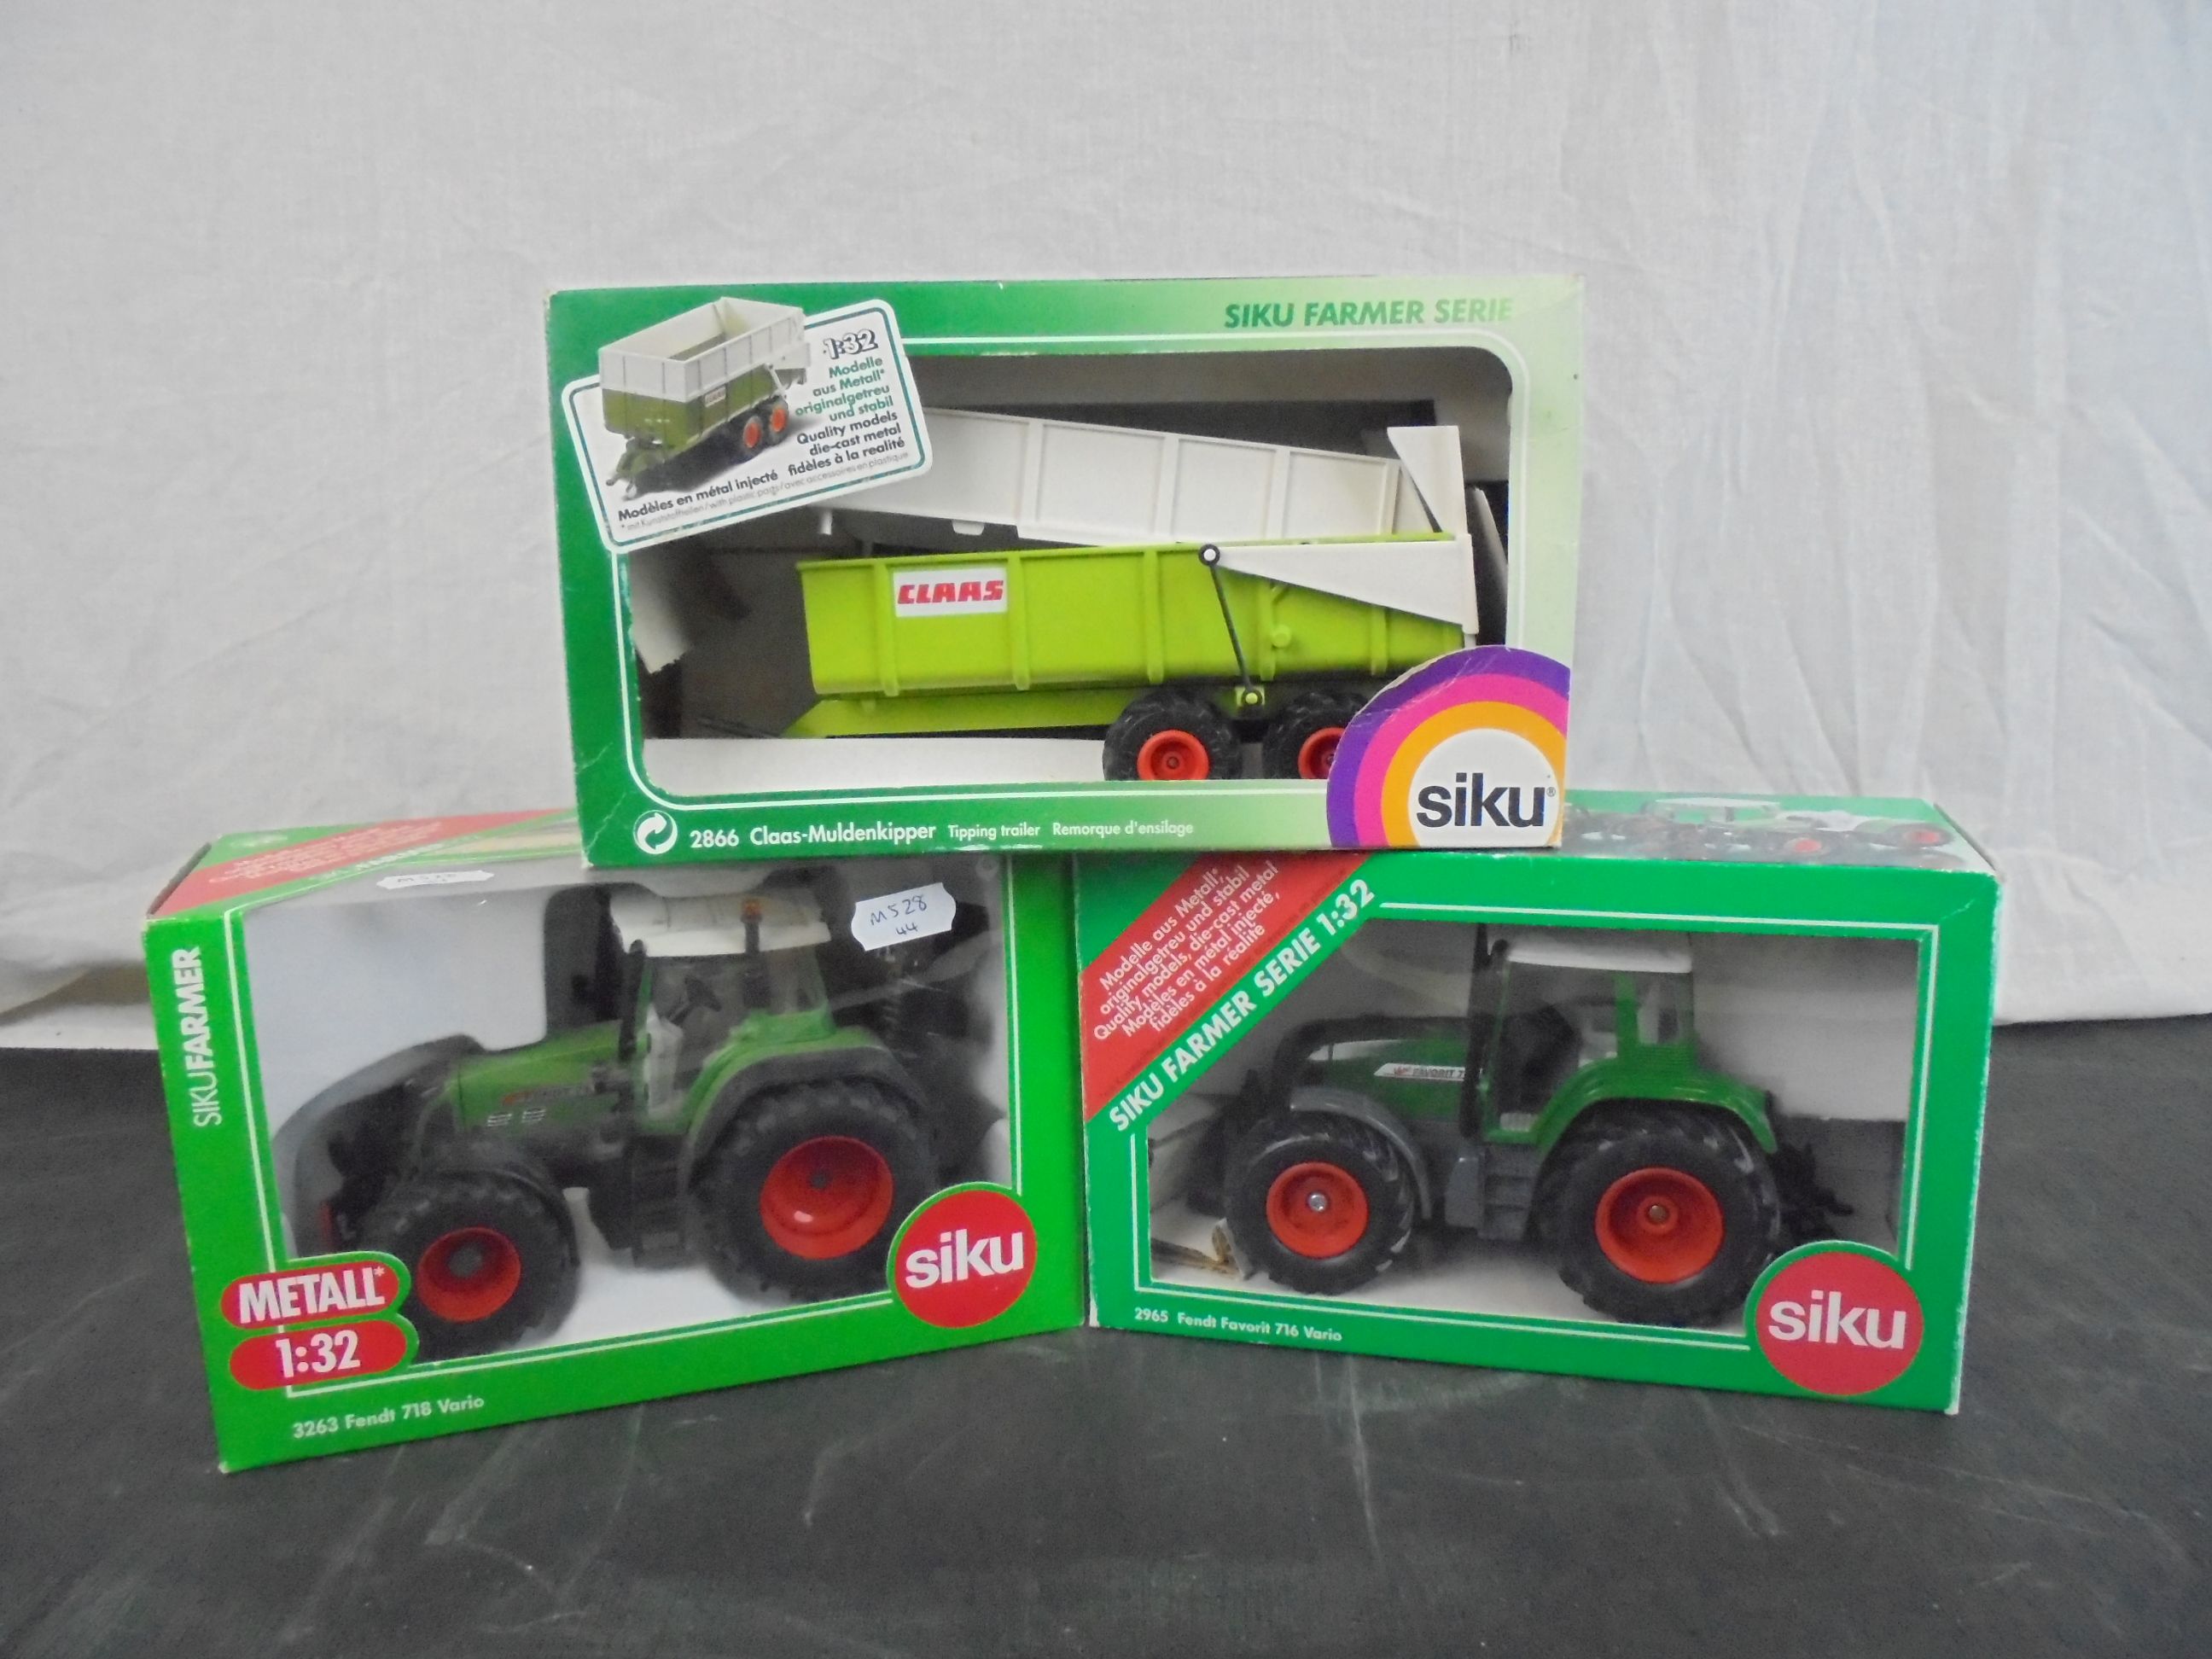 11 Boxed Siku 1/32 farming models, mainly tractors, to include 3254 x 2, 3258, 3263, 2965, 2968, - Image 2 of 5